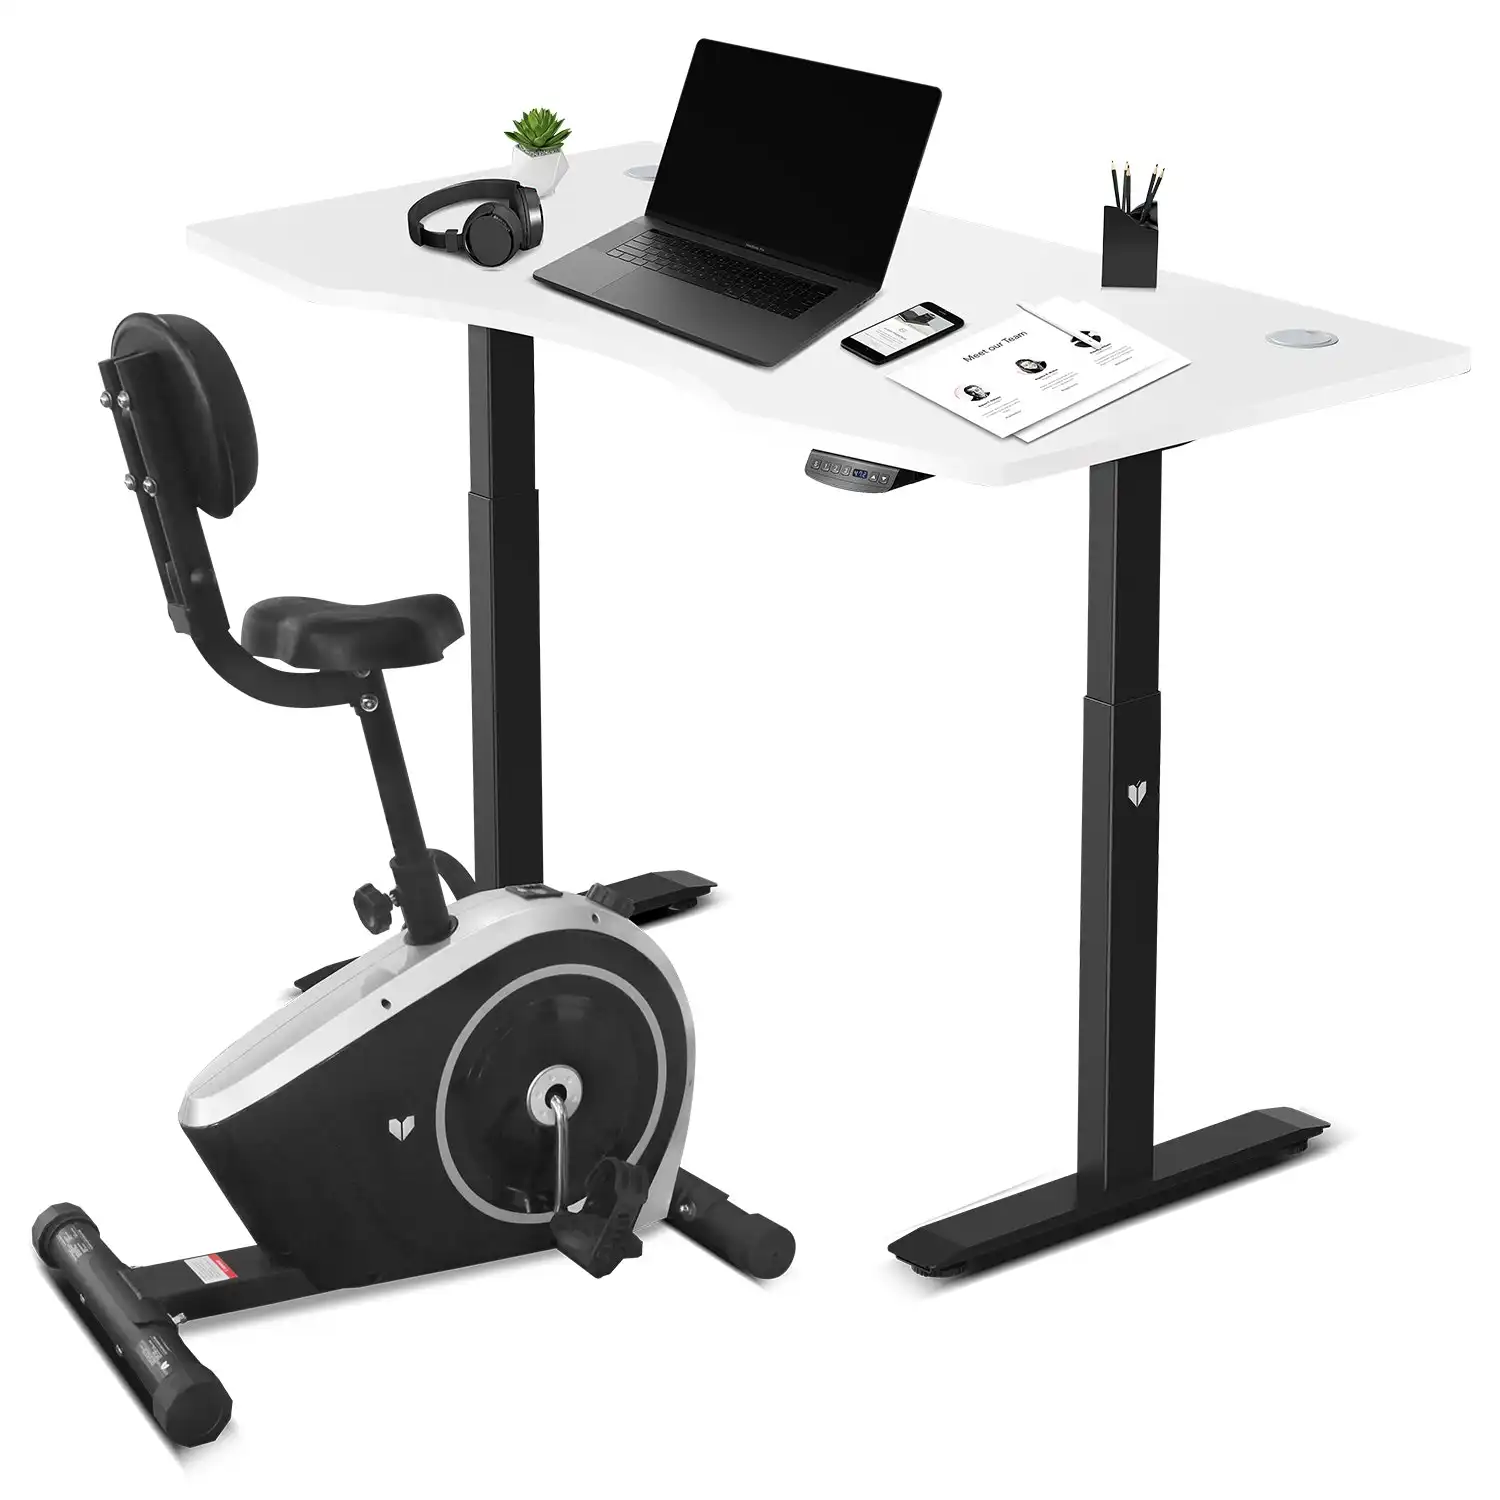 Lifespan Fitness Cyclestation3 Exercise Bike with ErgoDesk Automatic Standing Desk 1500mm in White